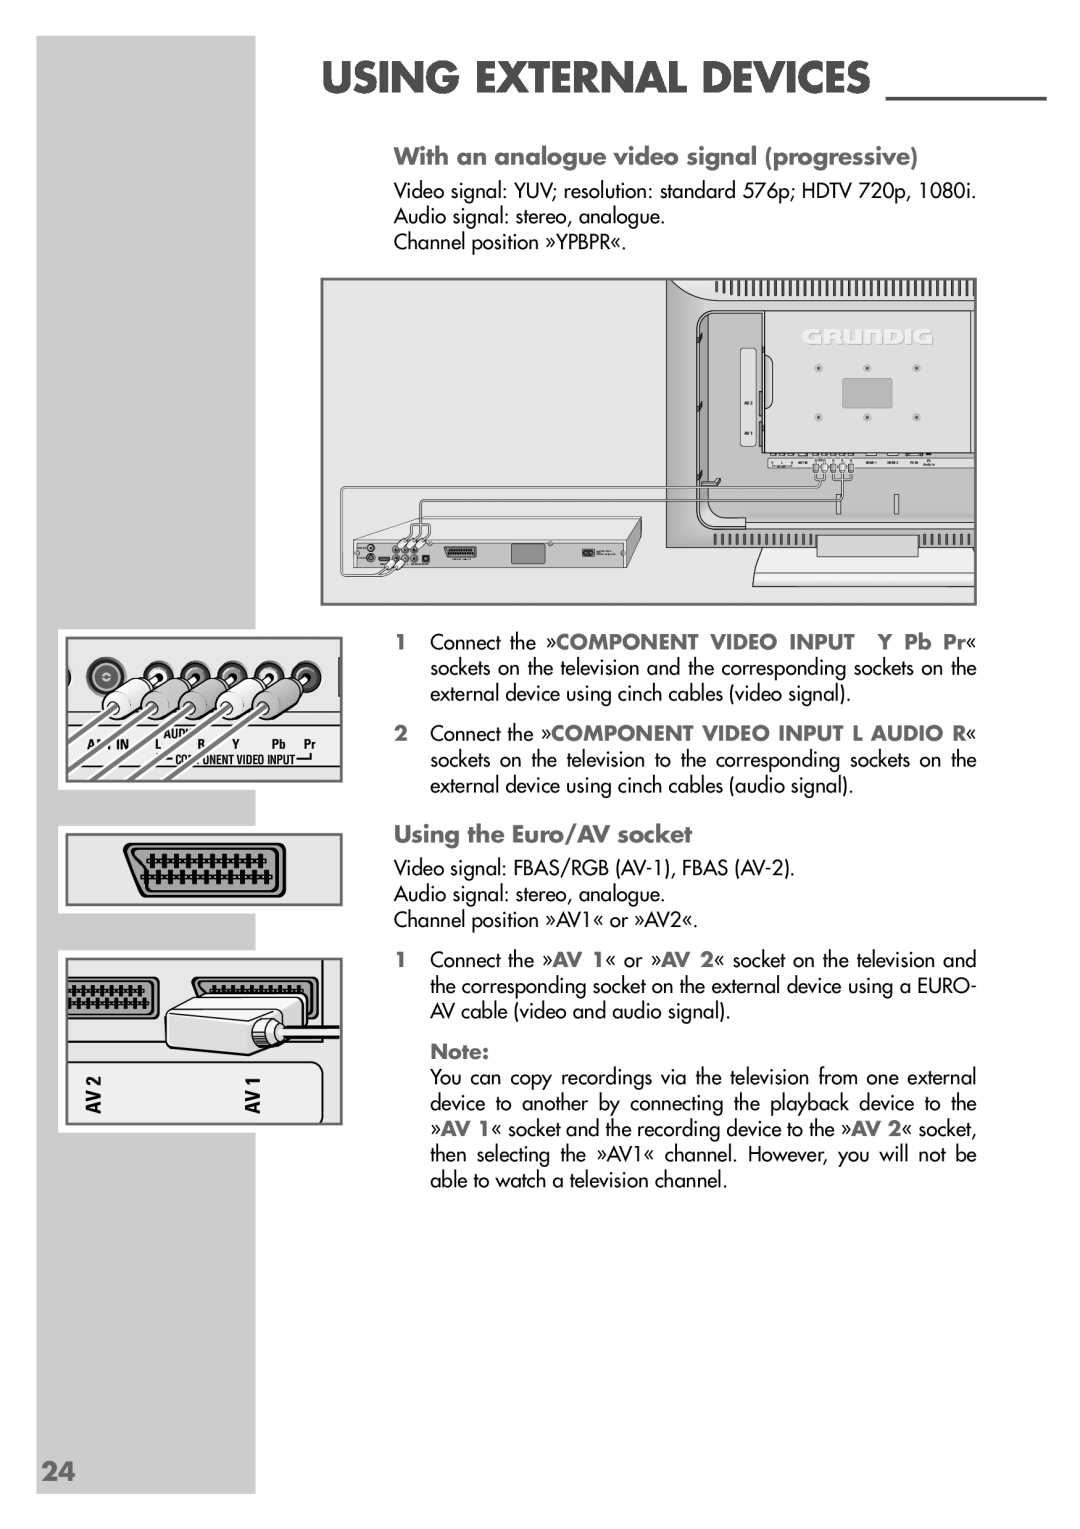 Grundig LXW 82-8720 With an analogue video signal progressive, Using the Euro/AV socket, Using External Devices, Y Pb Pr « 